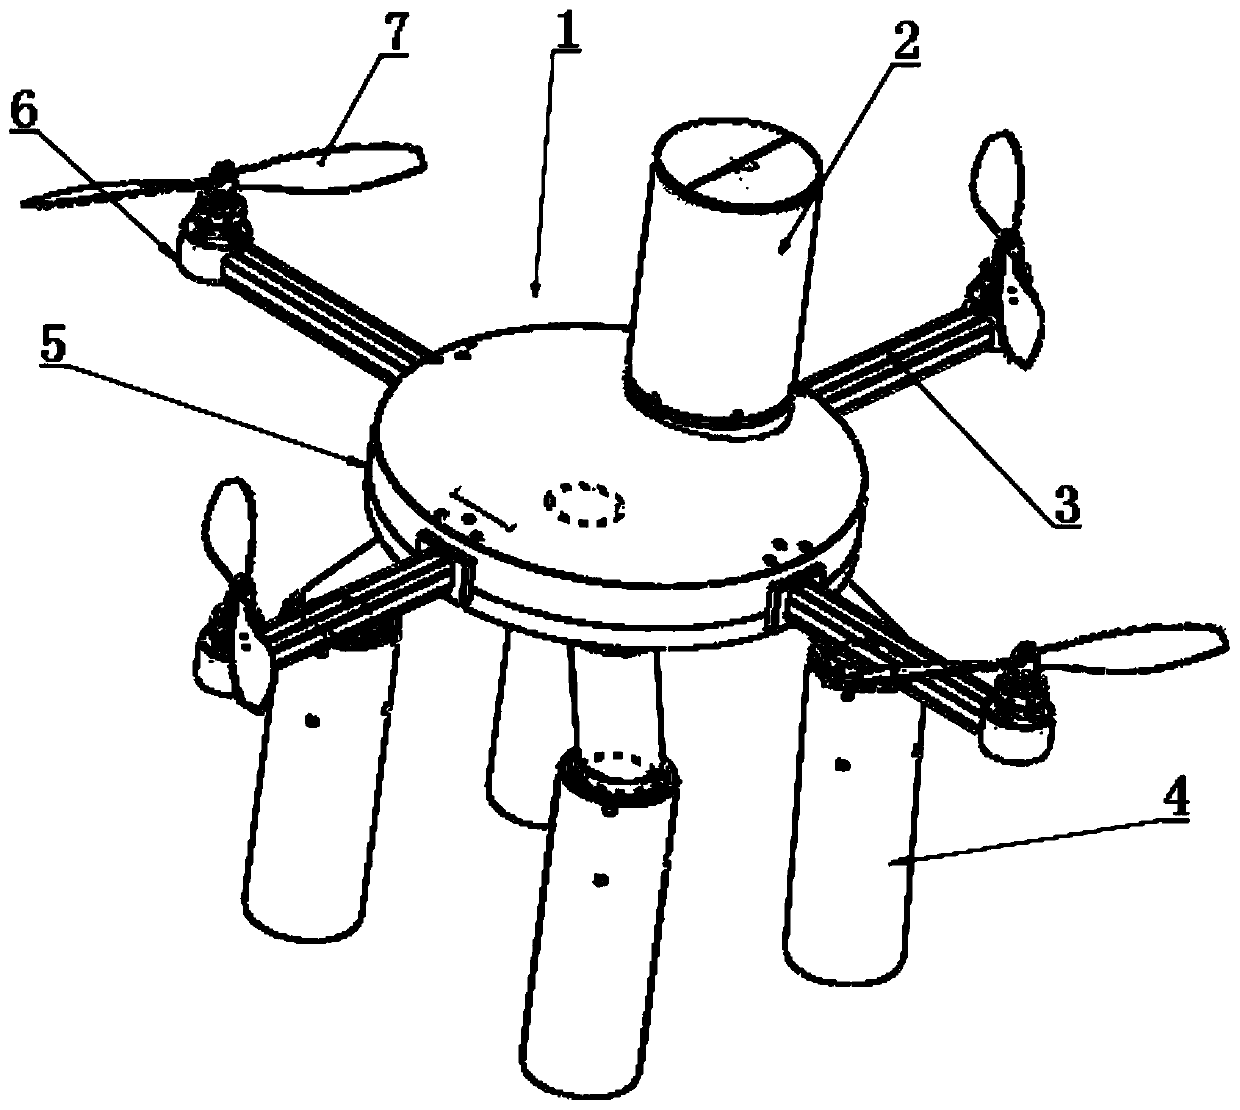 A method and system for self-adaptive landing of a multi-rotor UAV